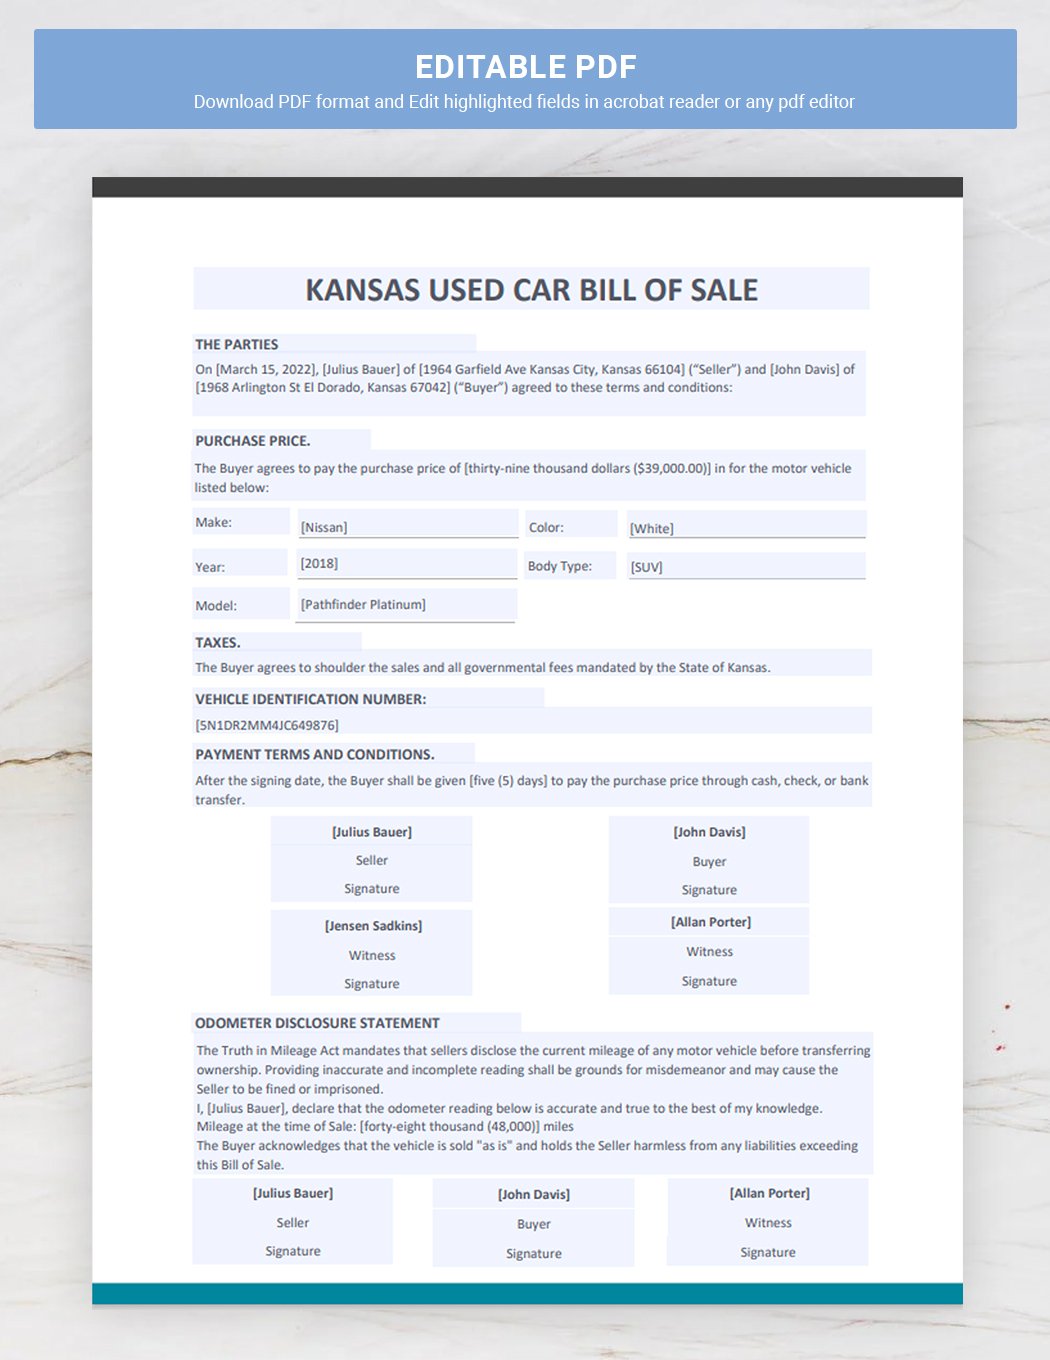 Kansas Used Car Bill of Sale Template Download in Word, Google Docs